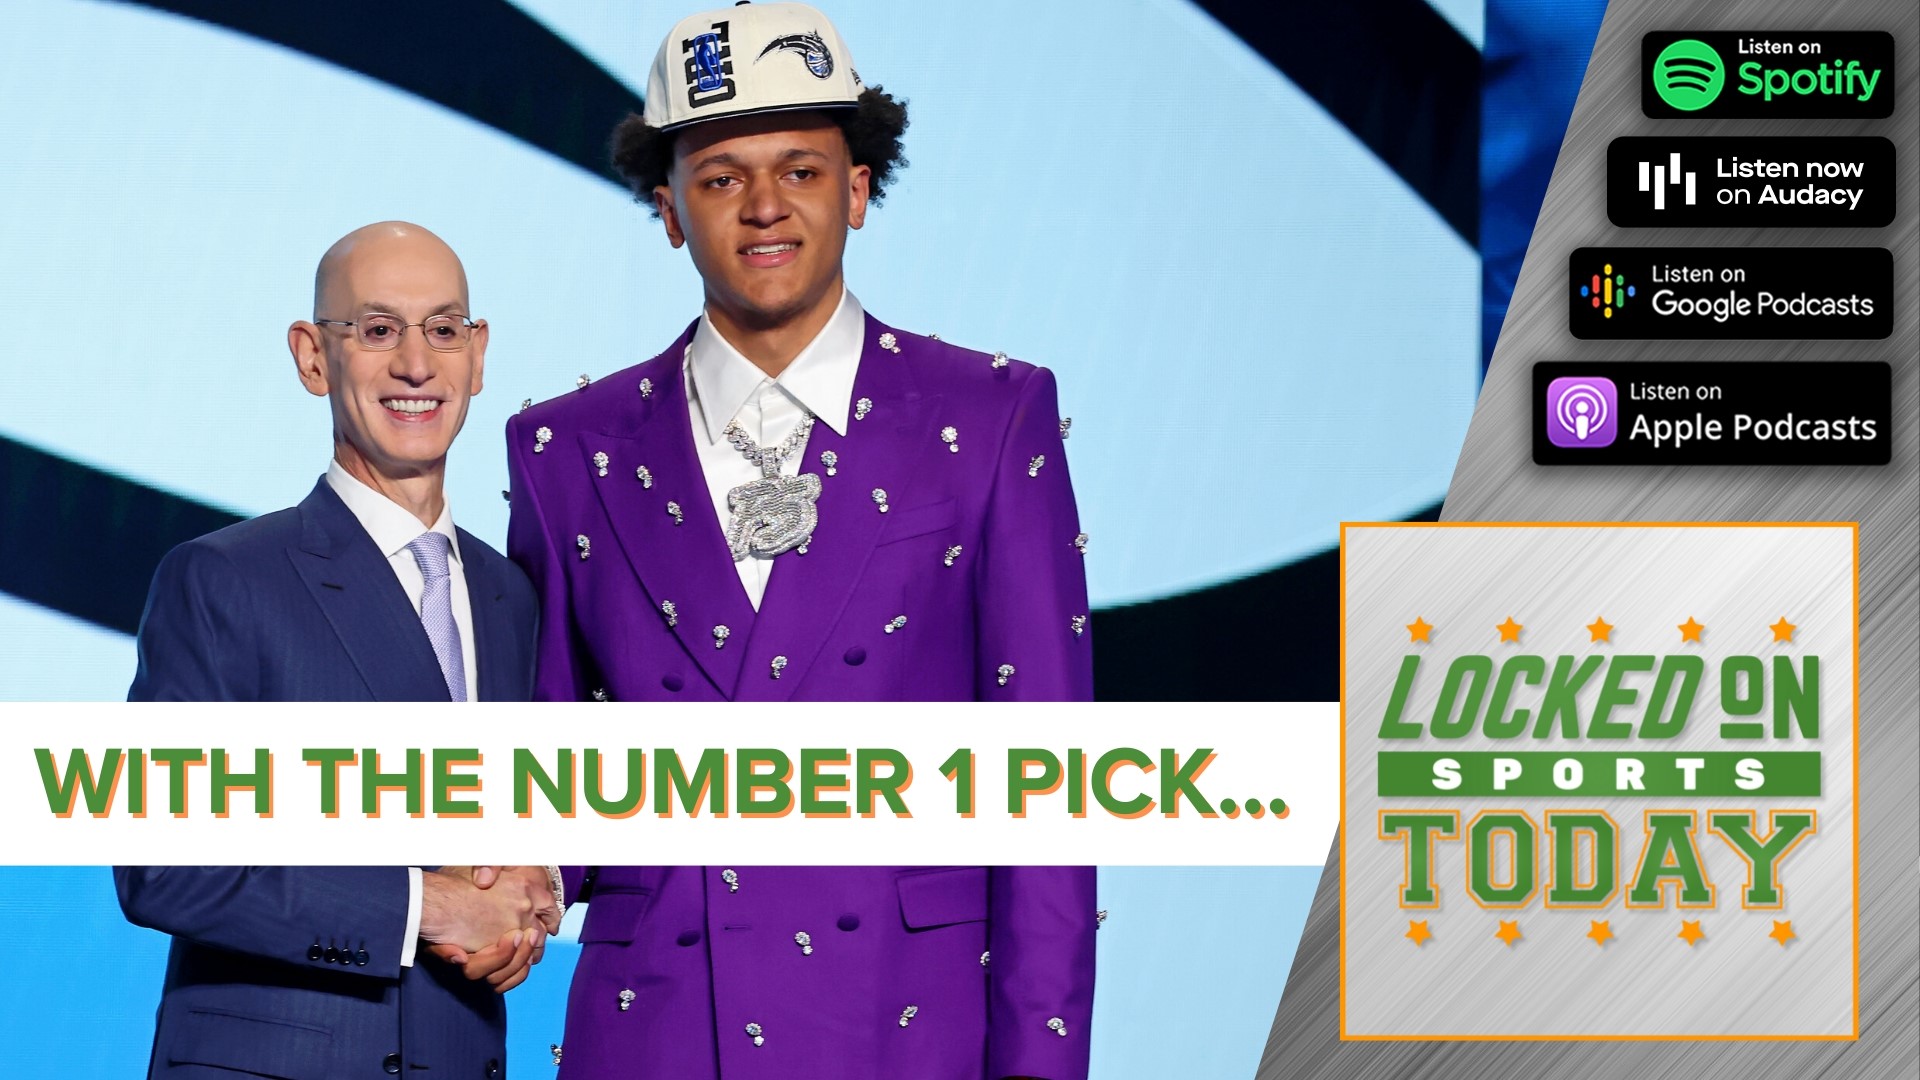 Discussing the biggest stories in sports including the NBA draft. A look at the Orlando Magic's first pick and why the Pistons had the best draft night.